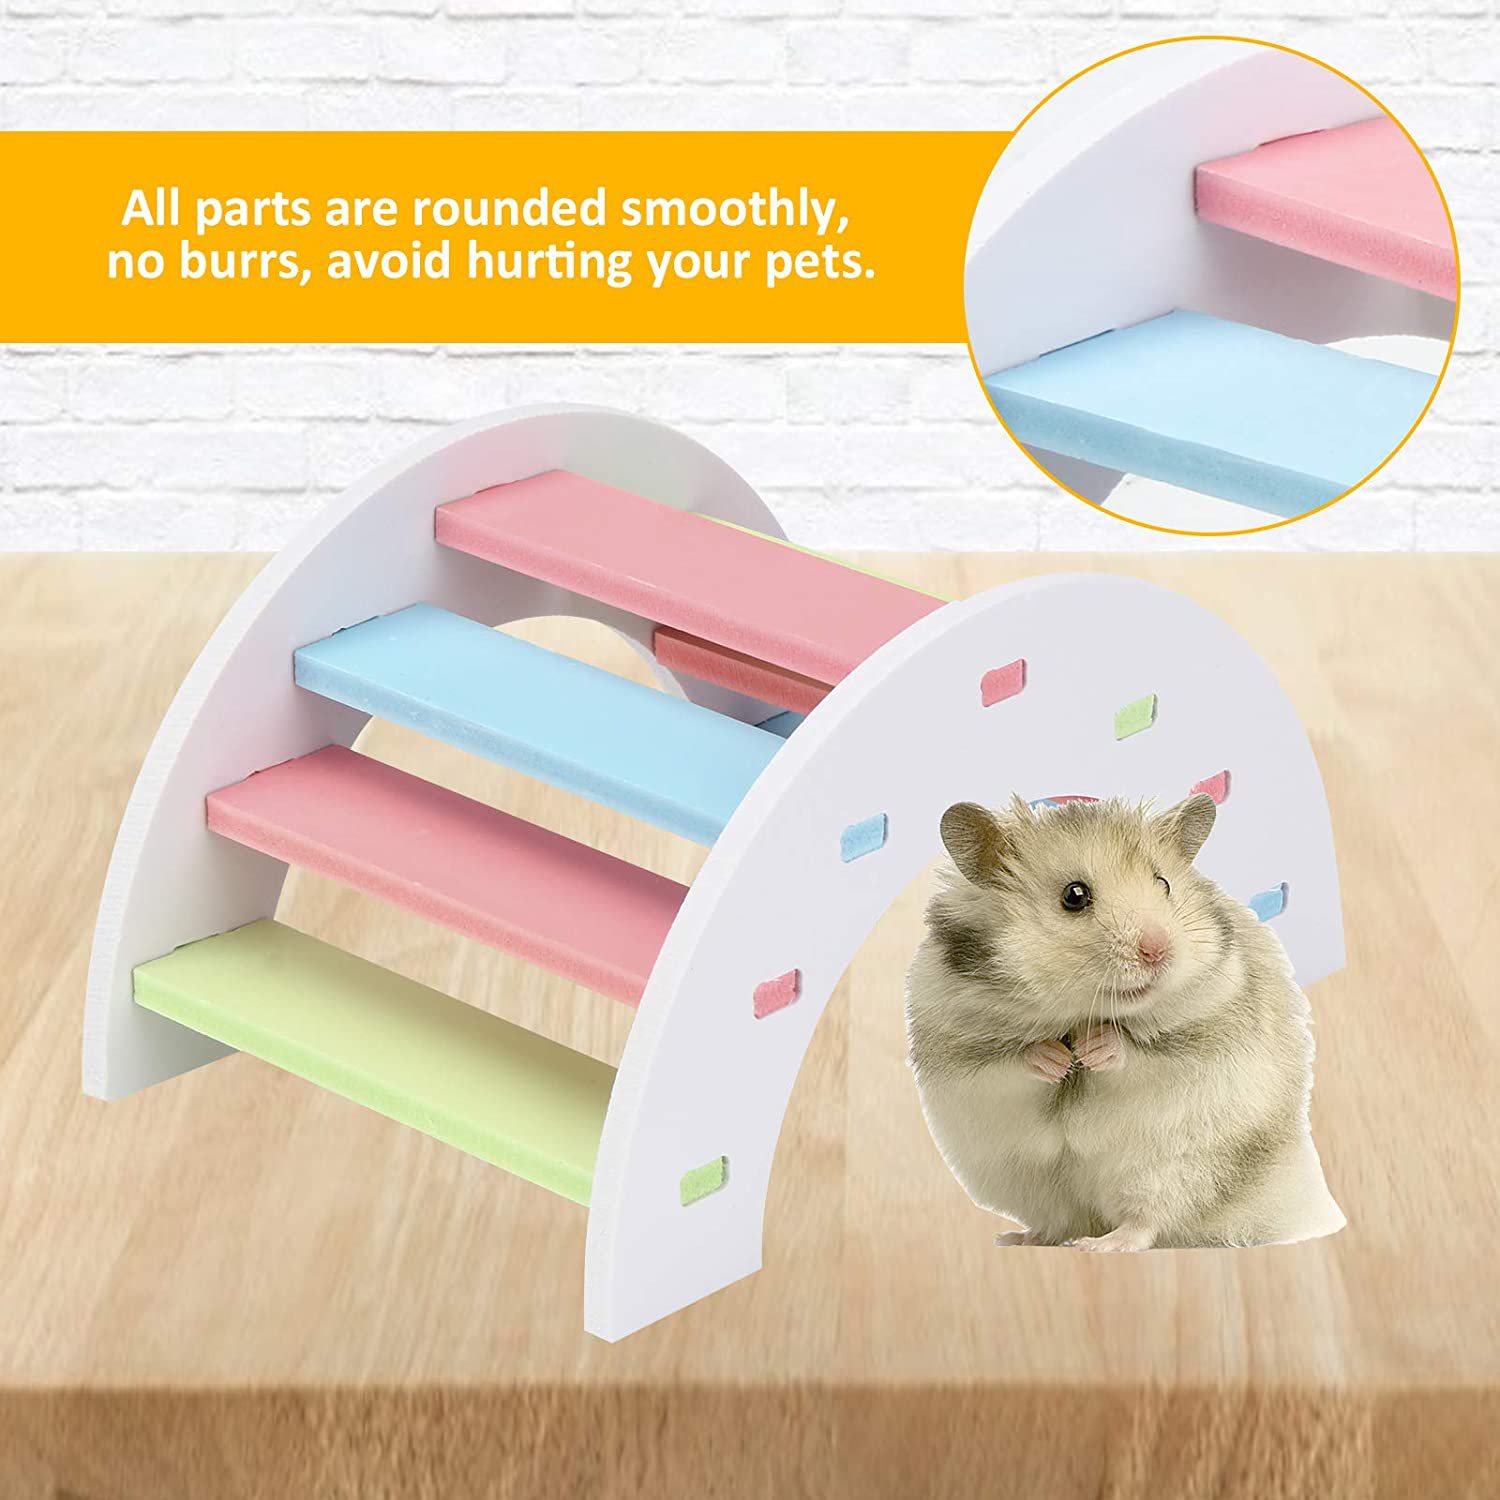 Lenpestia 6 Pieces Pet Sports Toys Set, Dwarf Hamsters House, Gerbil Hideout Rainbow Bridge, Seagrass Ball, Swing and Seesaw Syrian Hamster DIY Cage Accessories for Small Animal Habitat